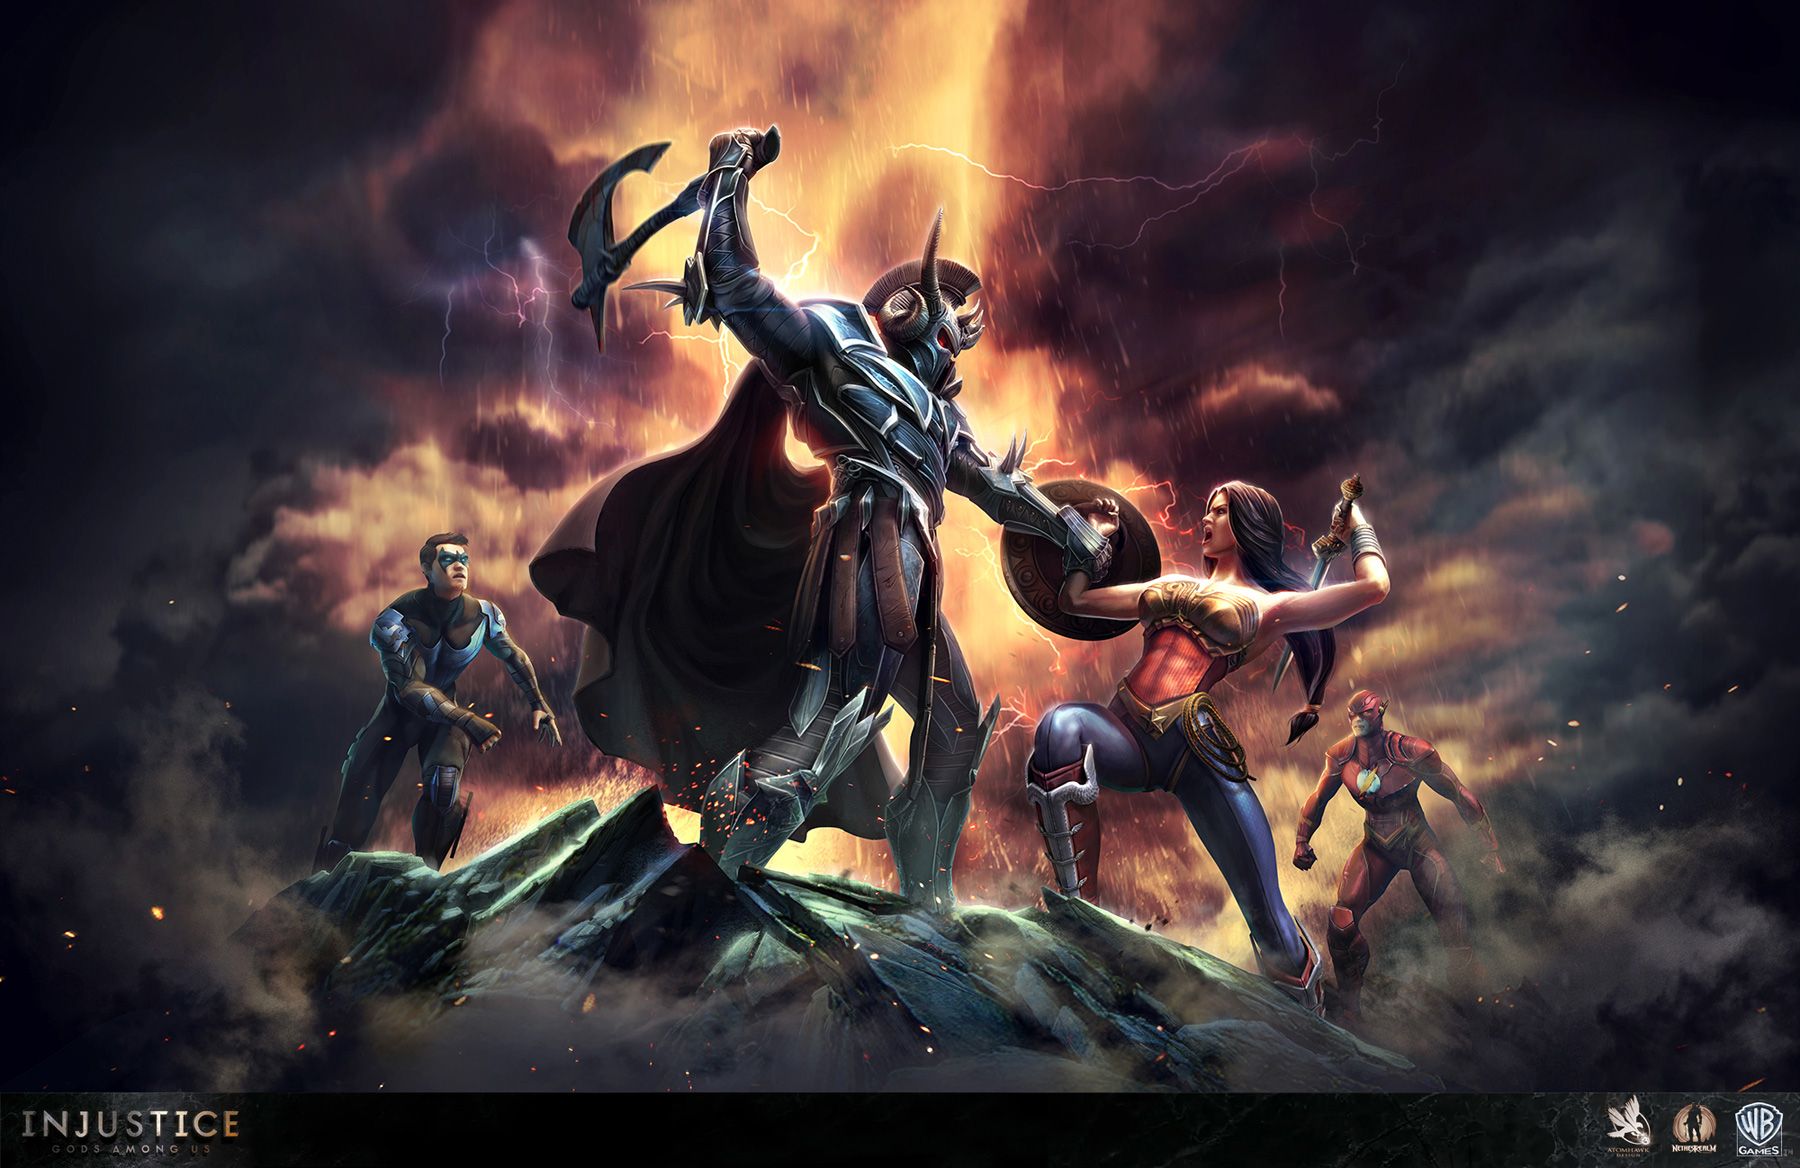 injustice: gods among us, video game, ares (dc comics), barry allen, dick grayson, flash, nightwing, wonder woman, injustice Phone Background